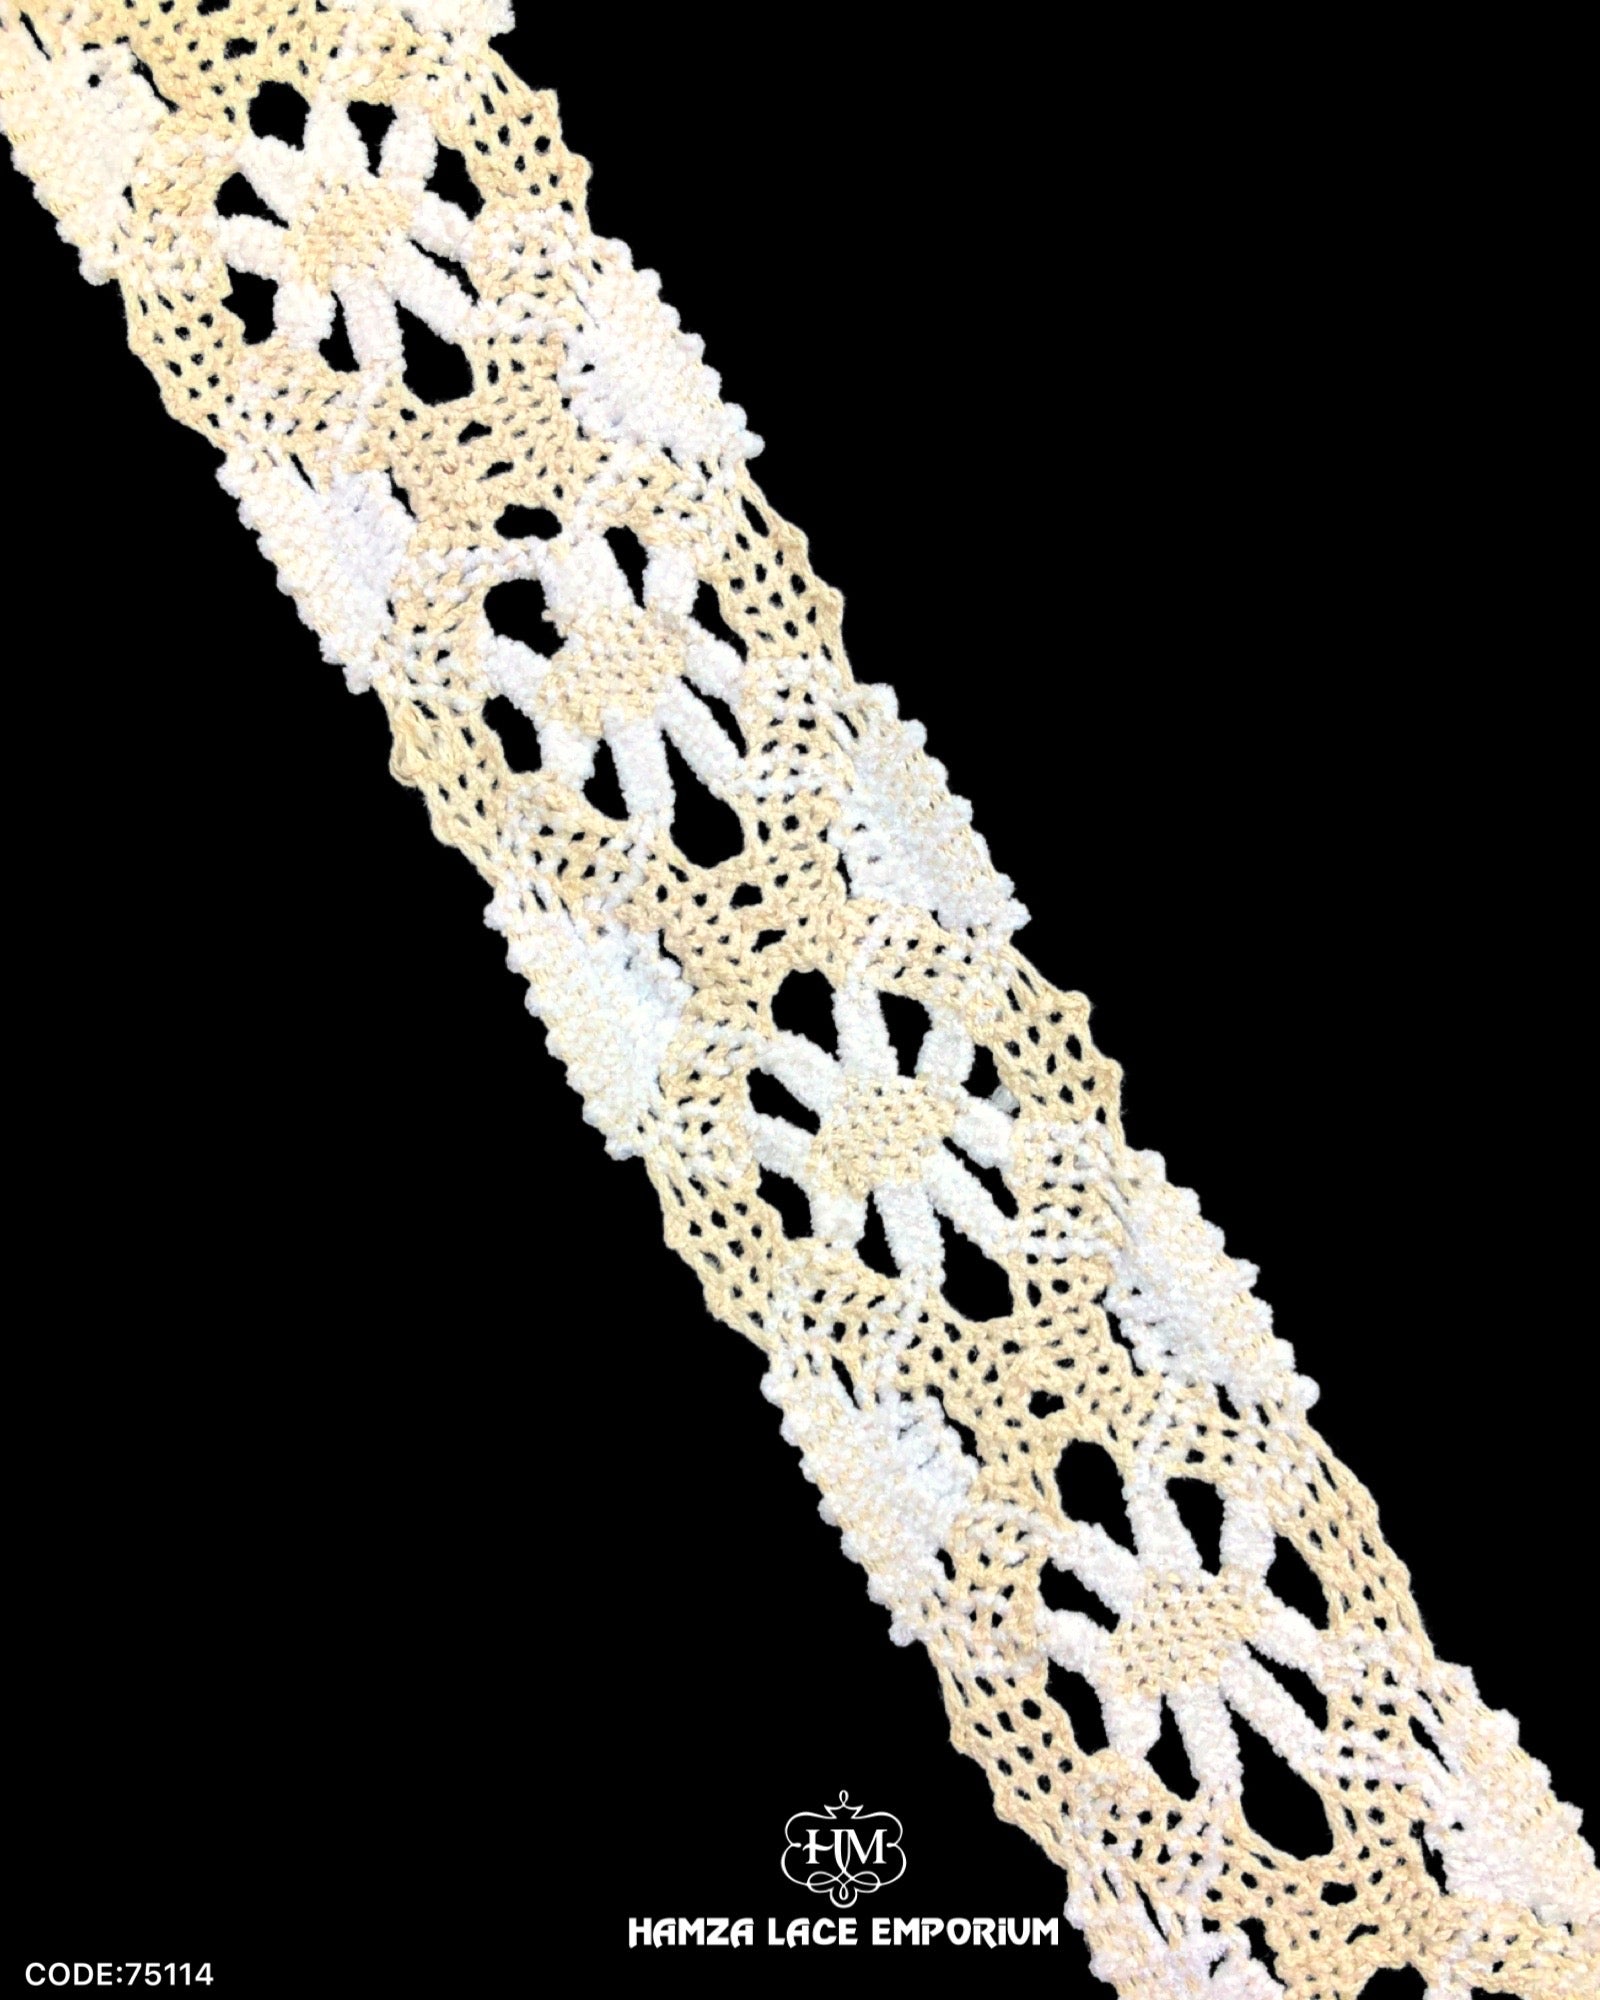 'Center Filling Crochet Lace 75114' with the name 'Hamza Lace' written at the bottom